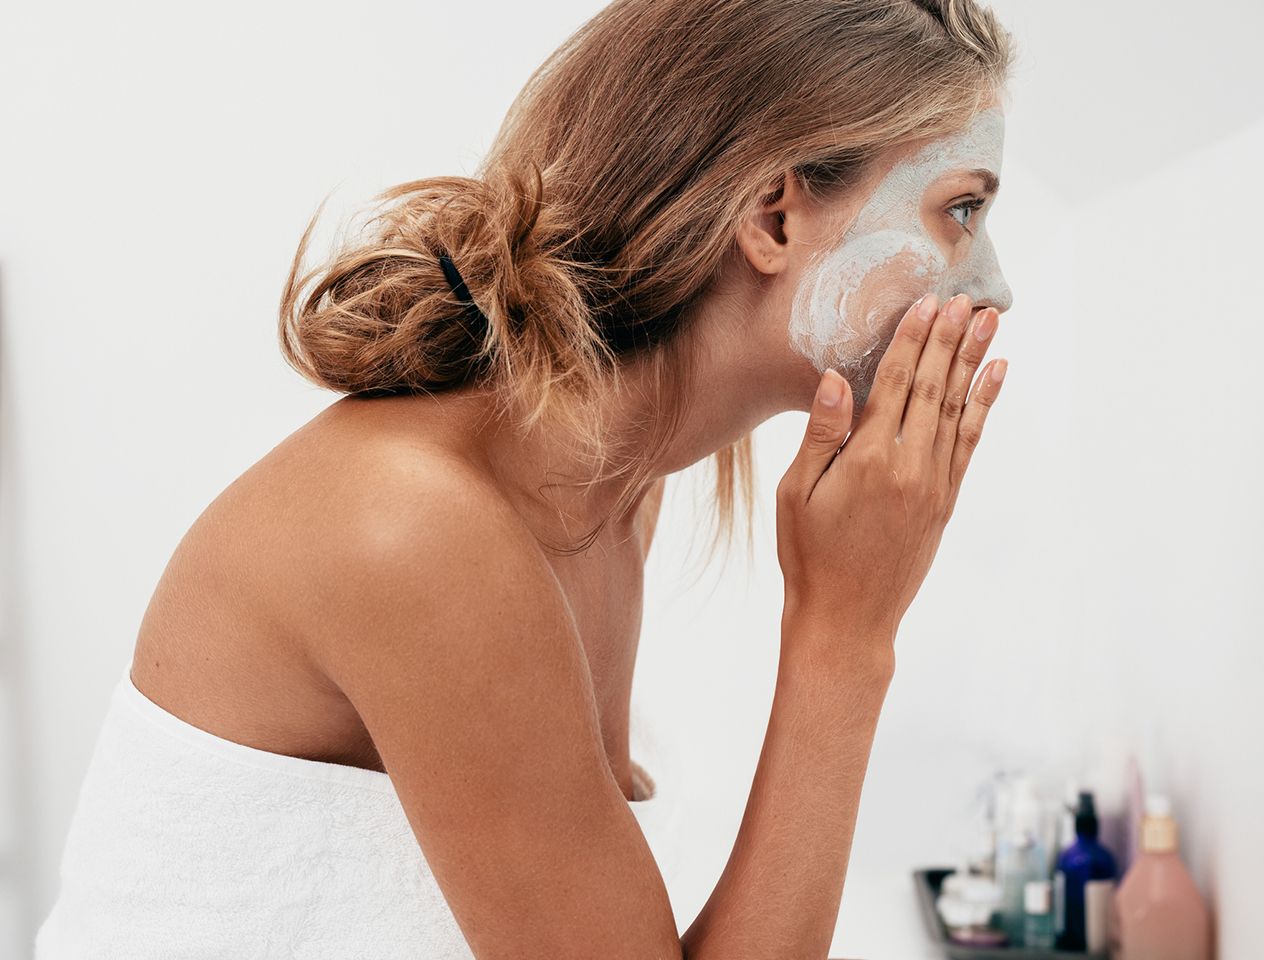 How to choose the right cleanser for your skin type